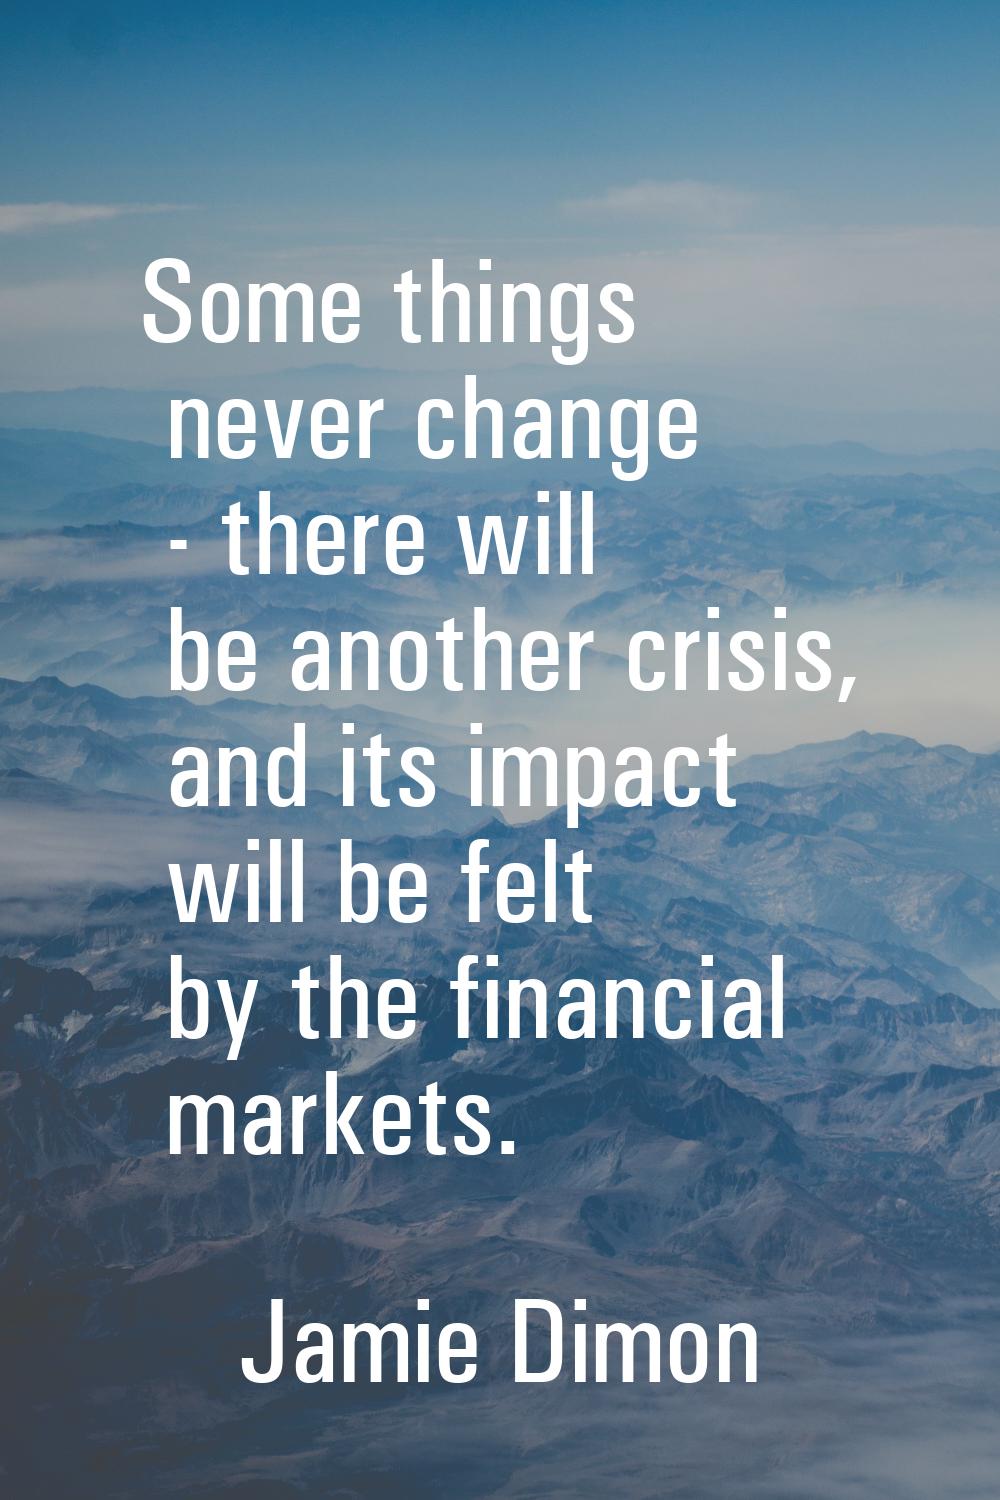 Some things never change - there will be another crisis, and its impact will be felt by the financi